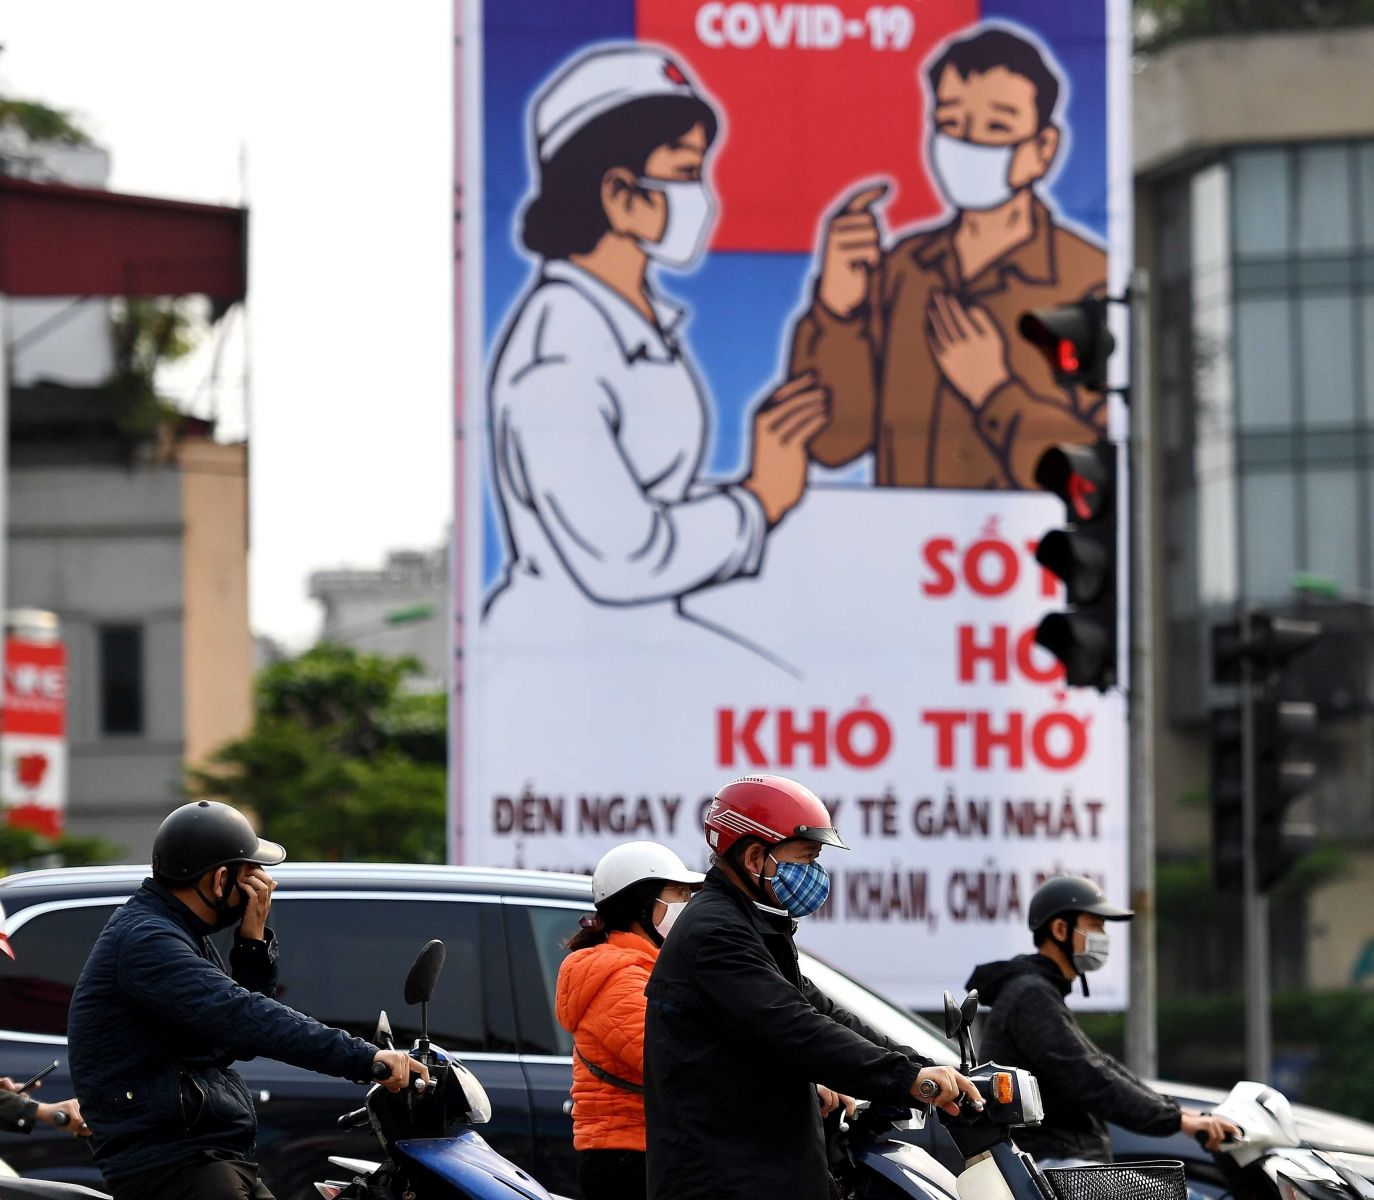 motorcycles on busy Hanoi street passing by billboard uging masks to prevent against Covid-19